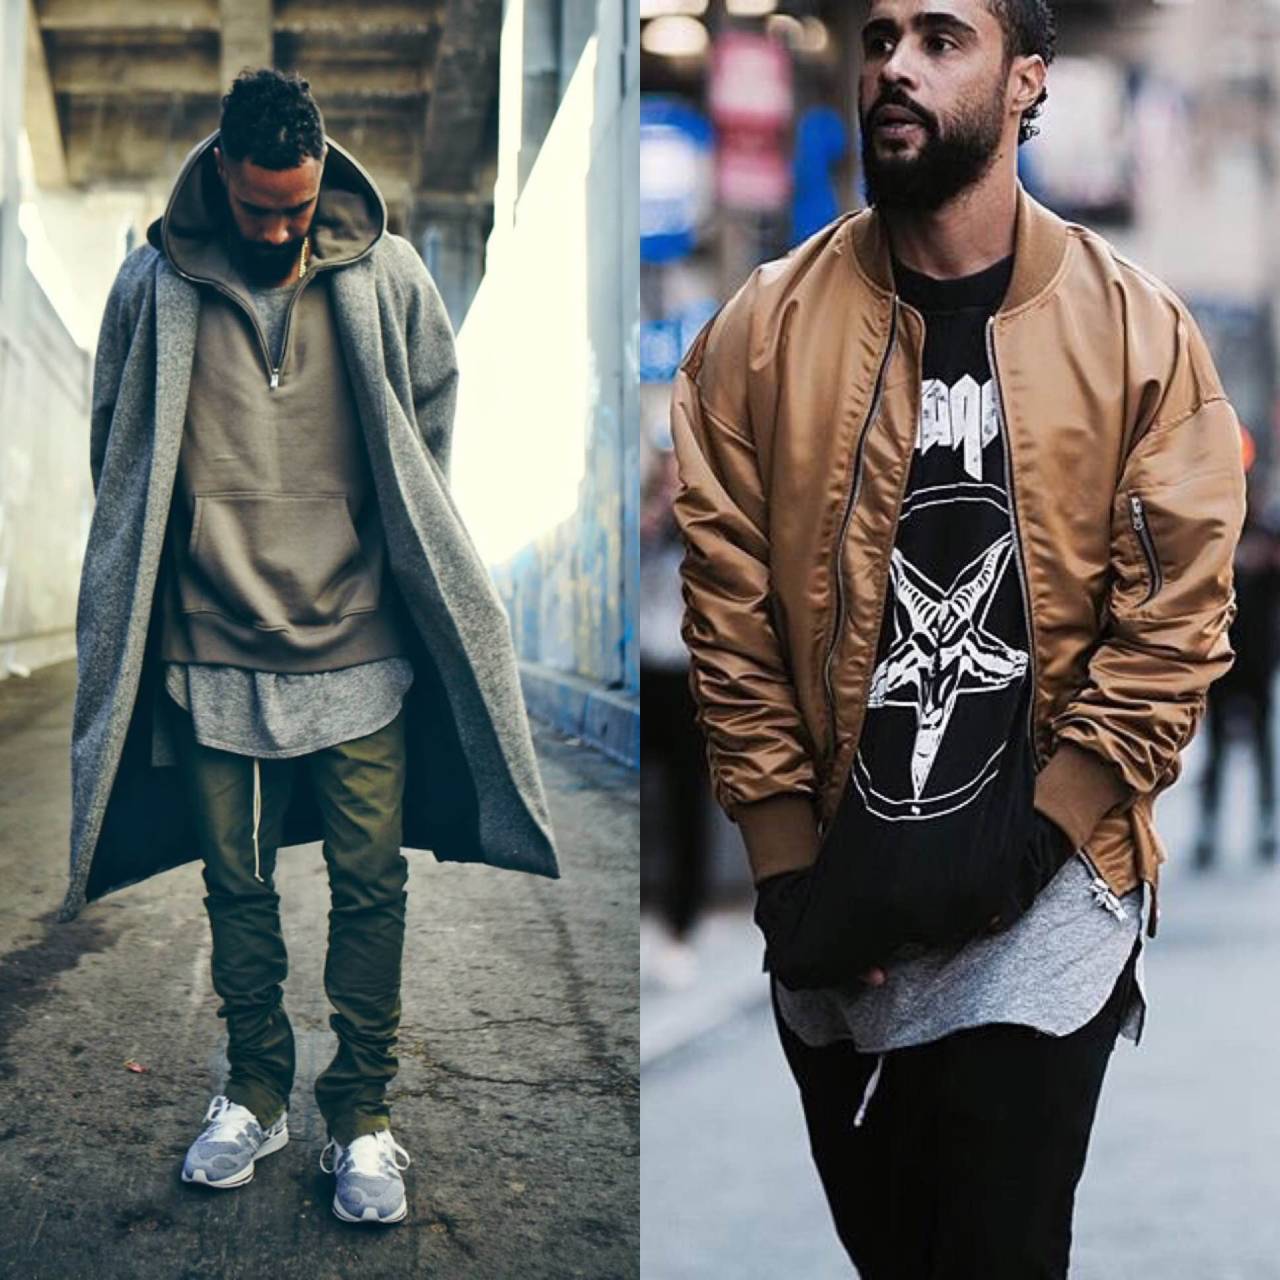 THE UNCLASSIFIED COOL — [UNCLASSIFIED STYLE]: JERRY LORENZO